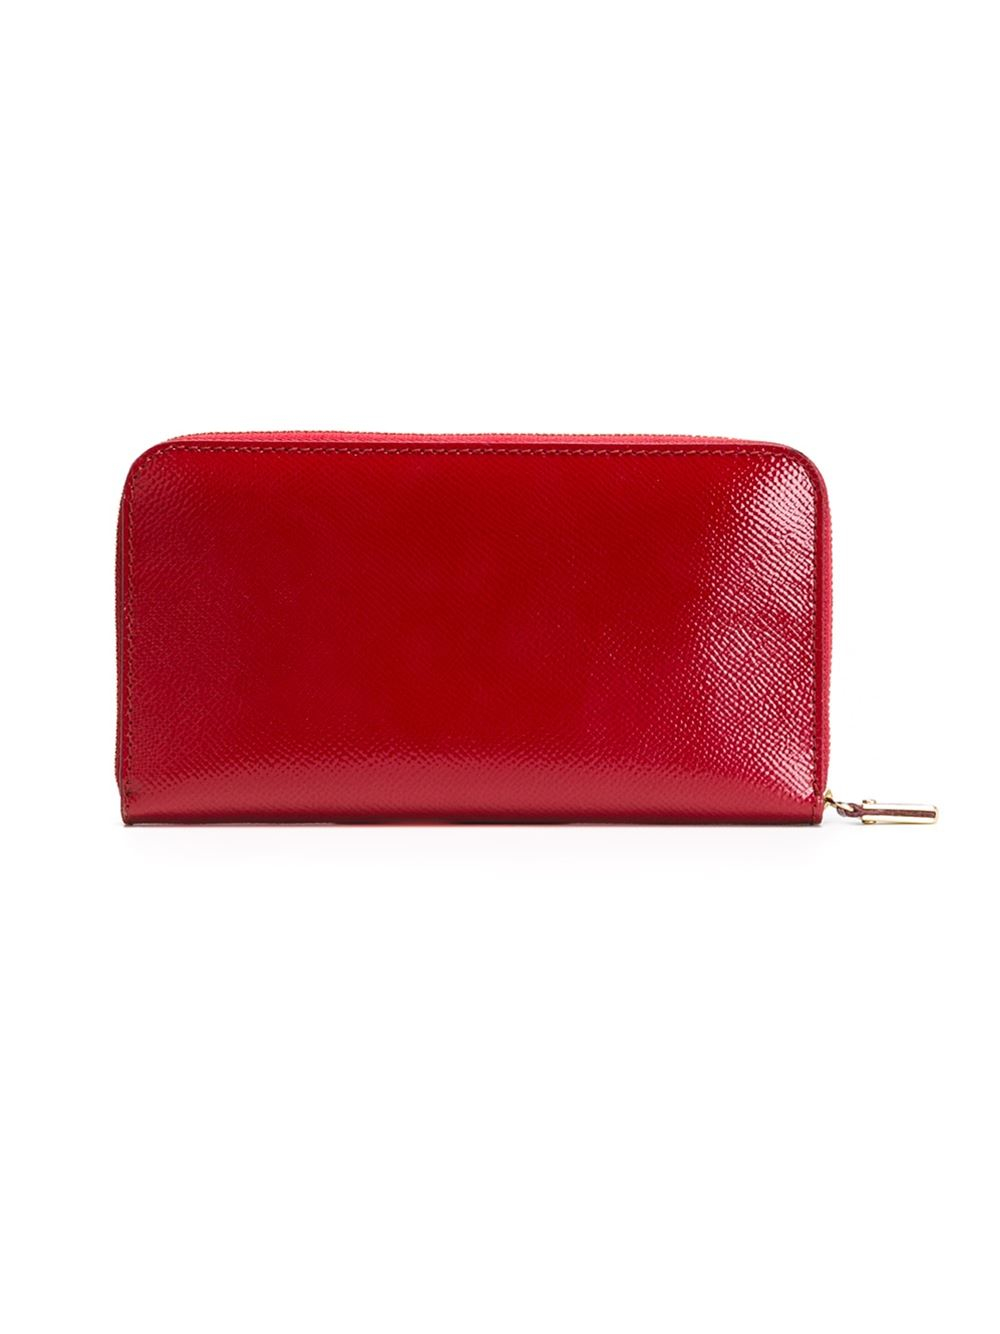 Burberry london Patent London Leather Wallet in Red | Lyst